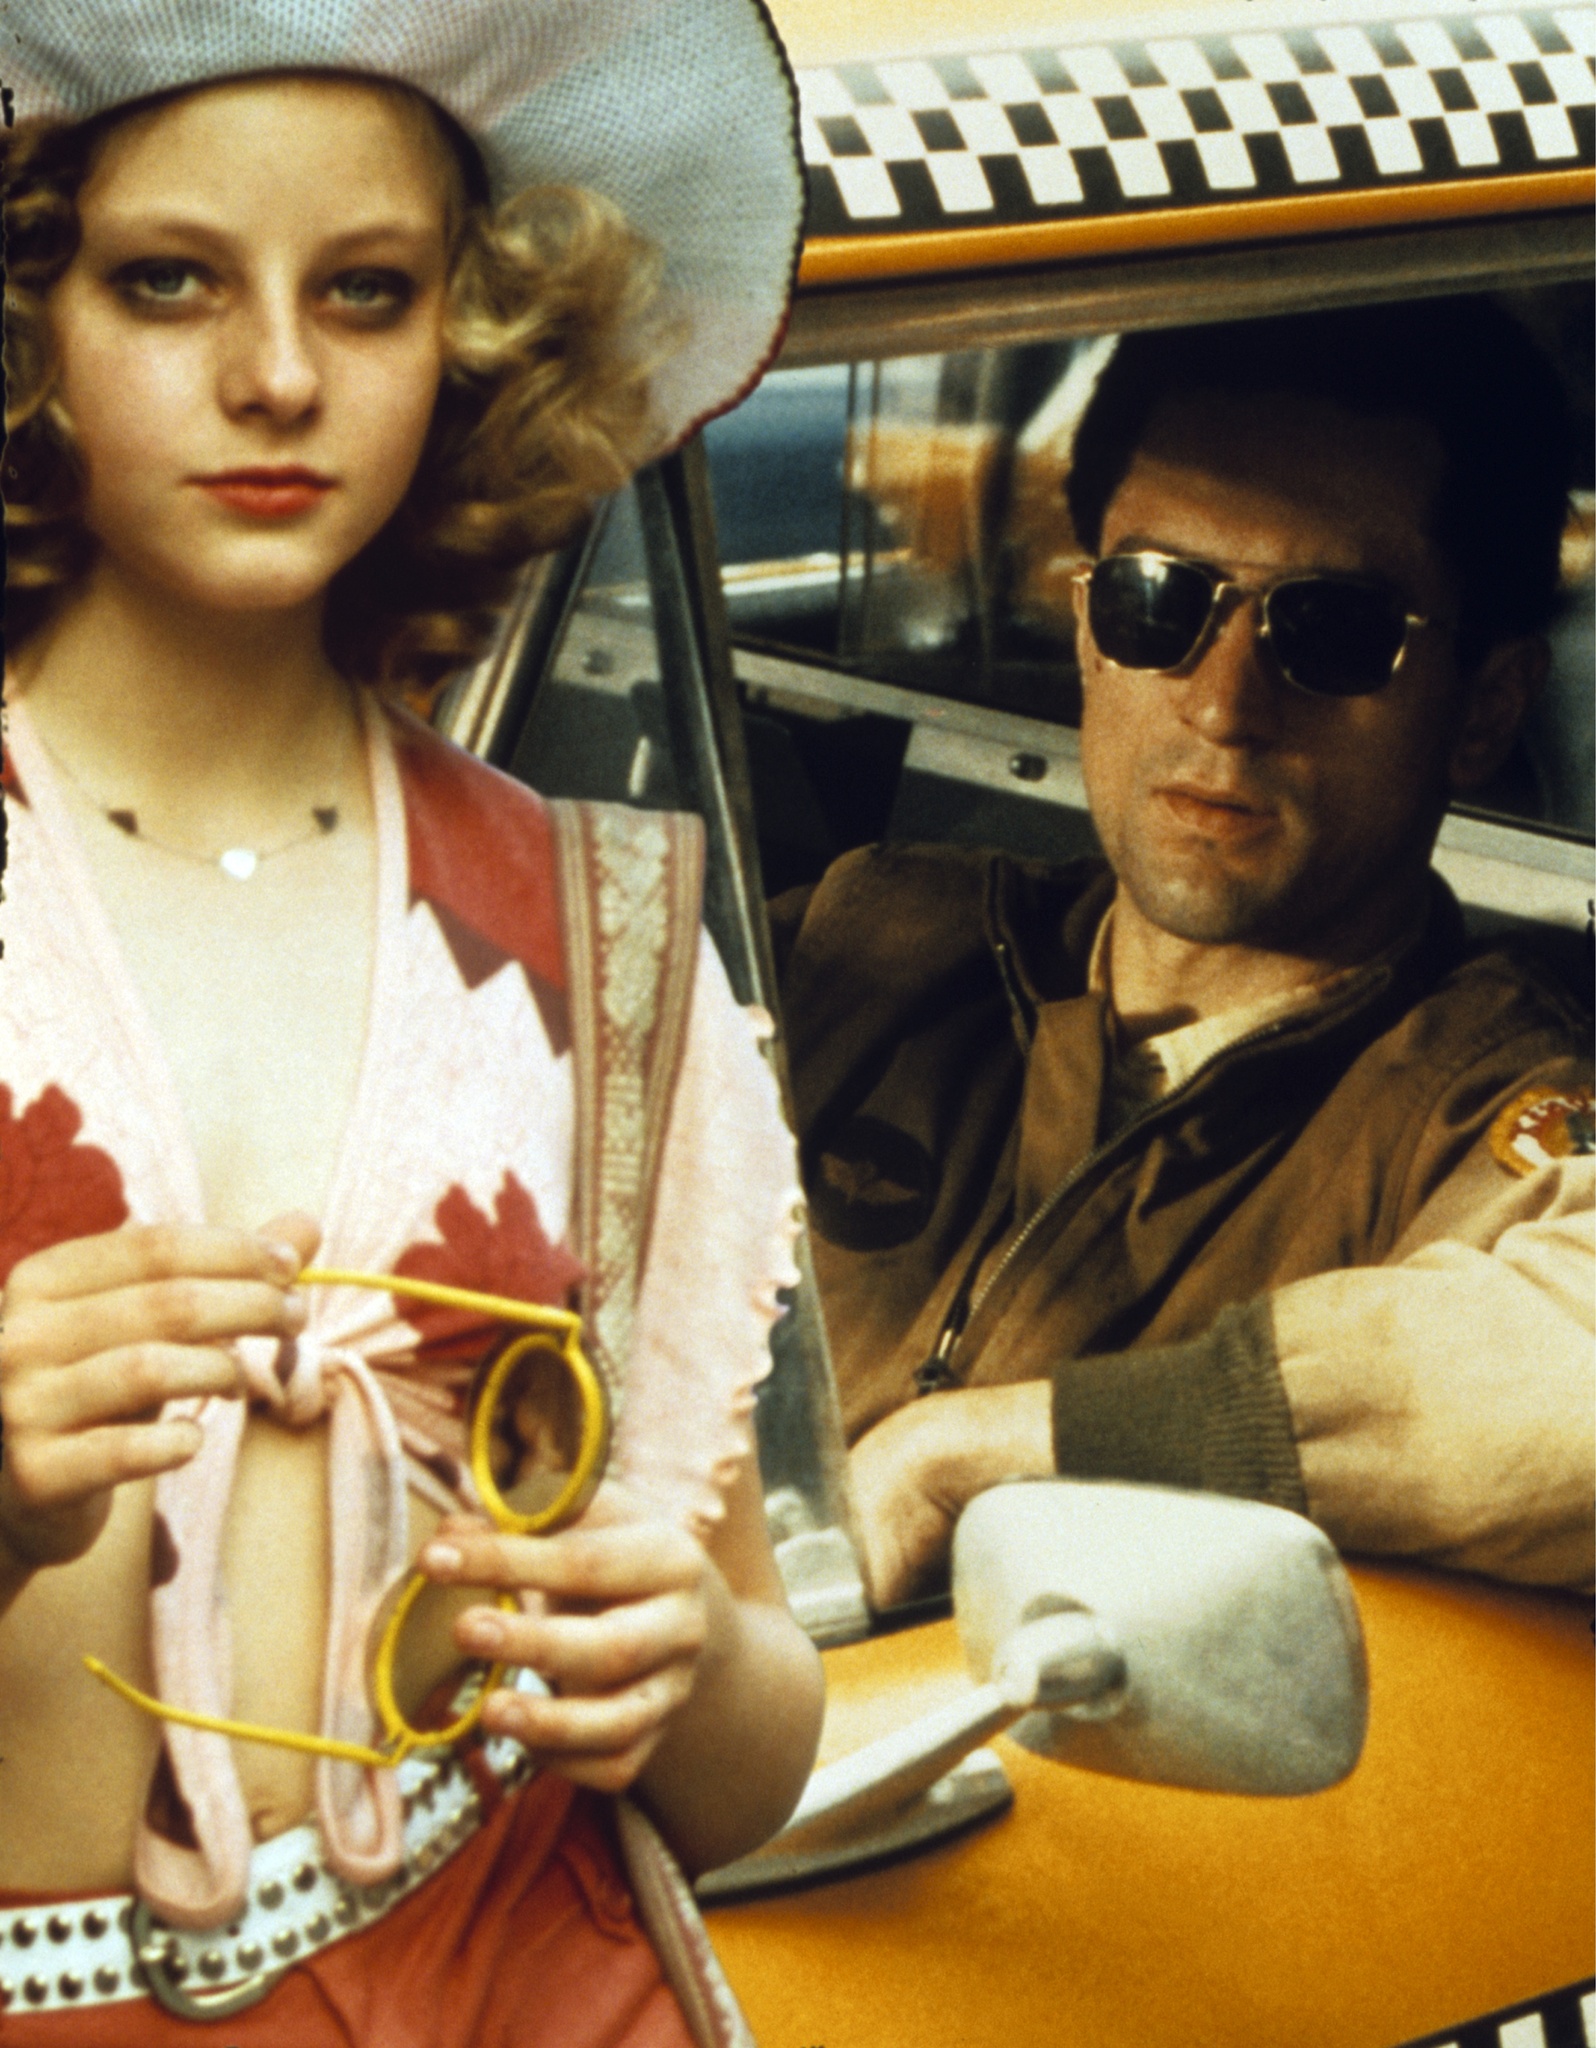 Still of Robert De Niro and Jodie Foster in Taxi Driver (1976)